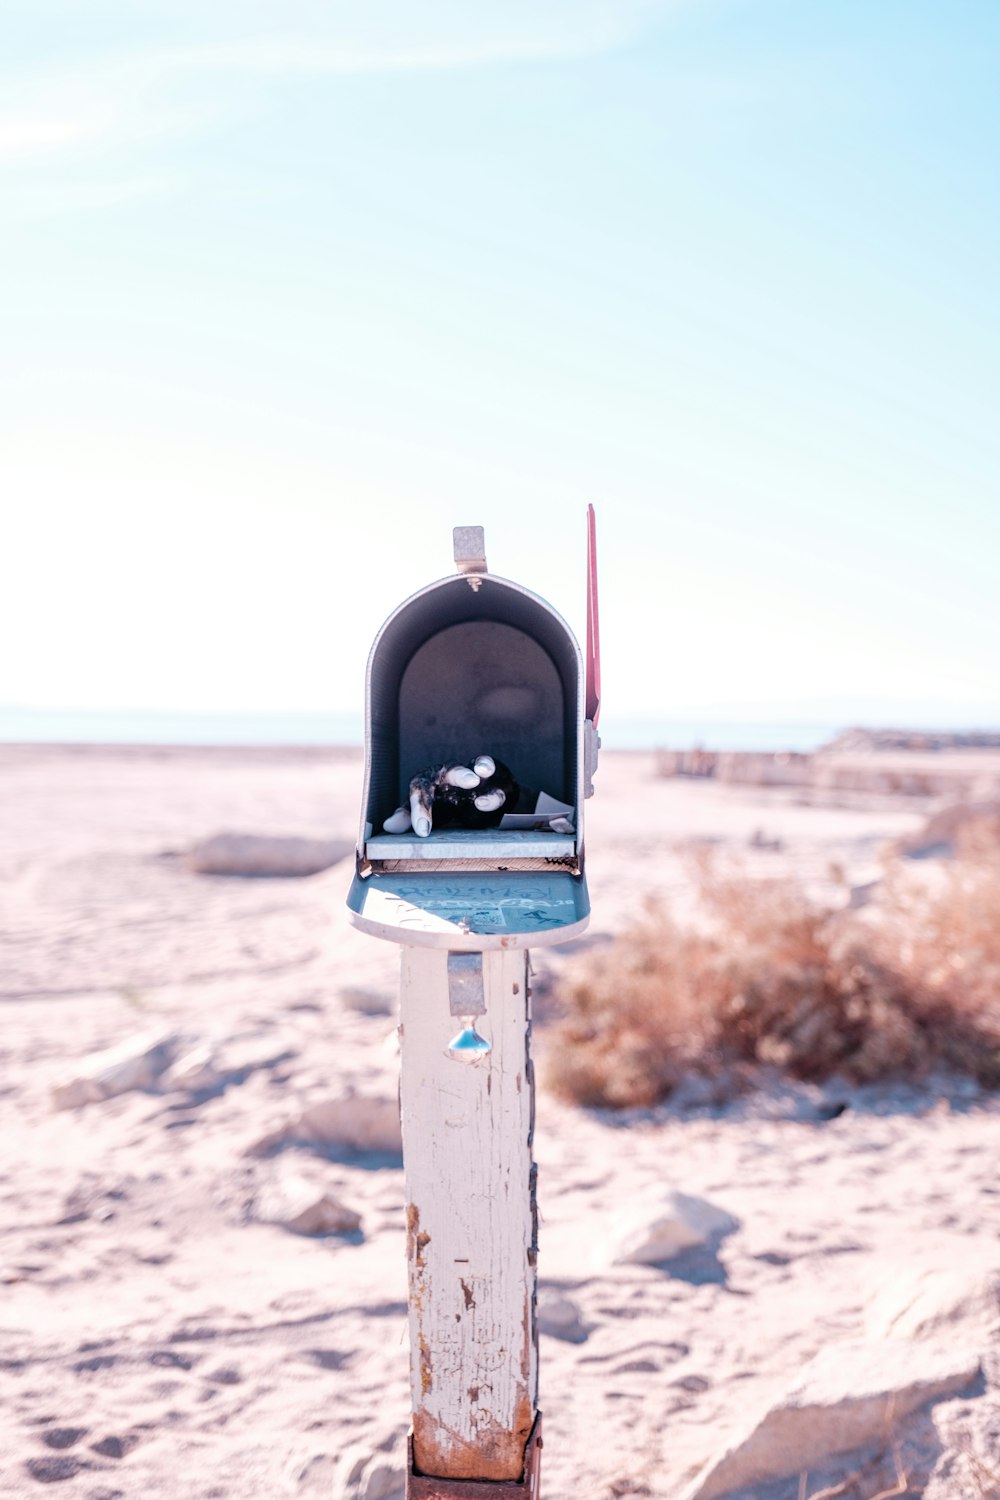 a mailbox in the middle of the desert